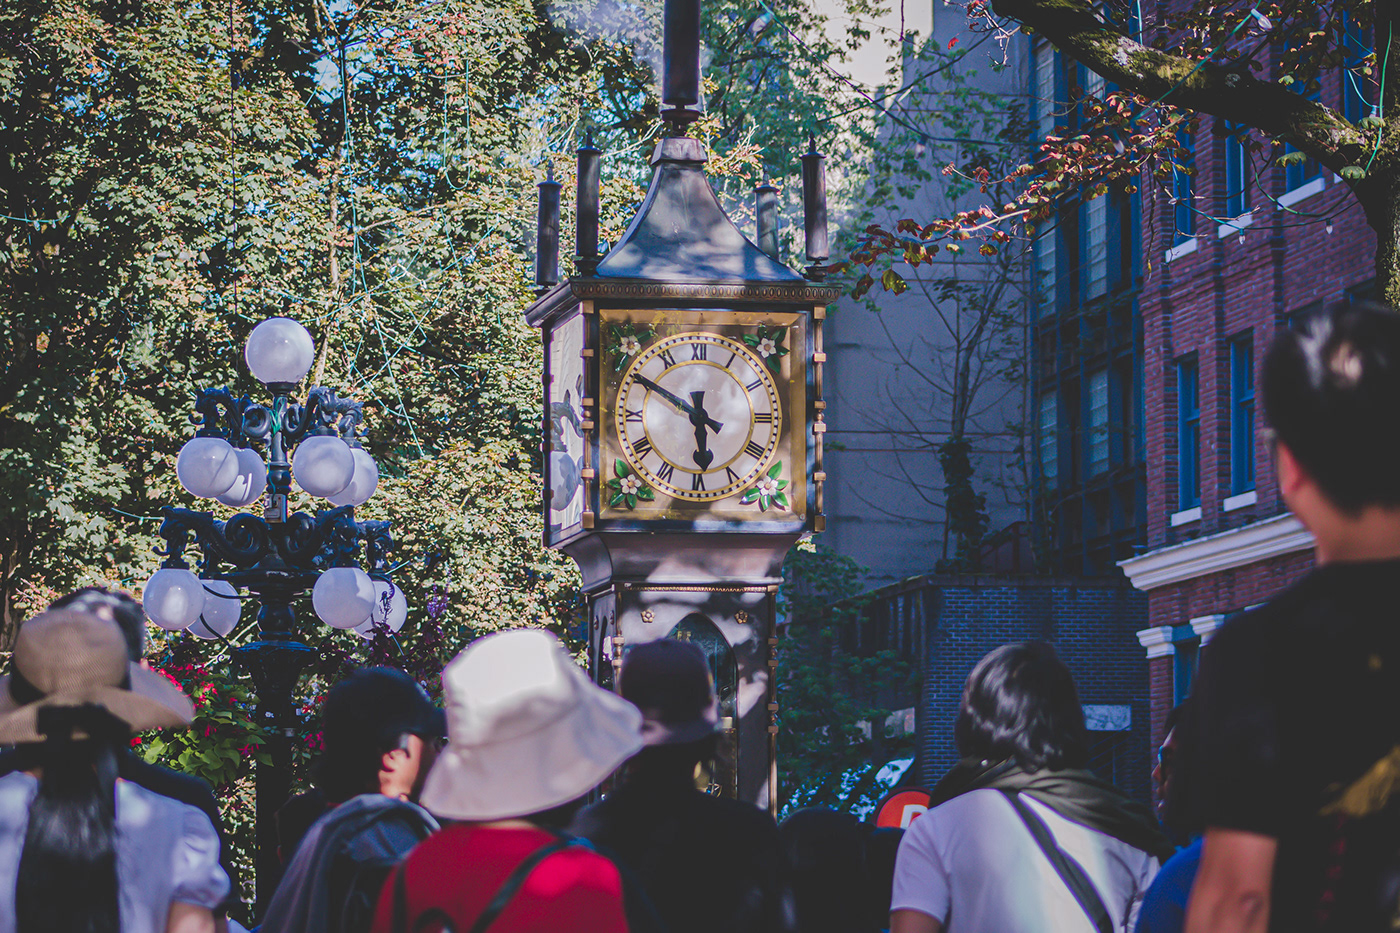 tourists city downtown culture people steam clock